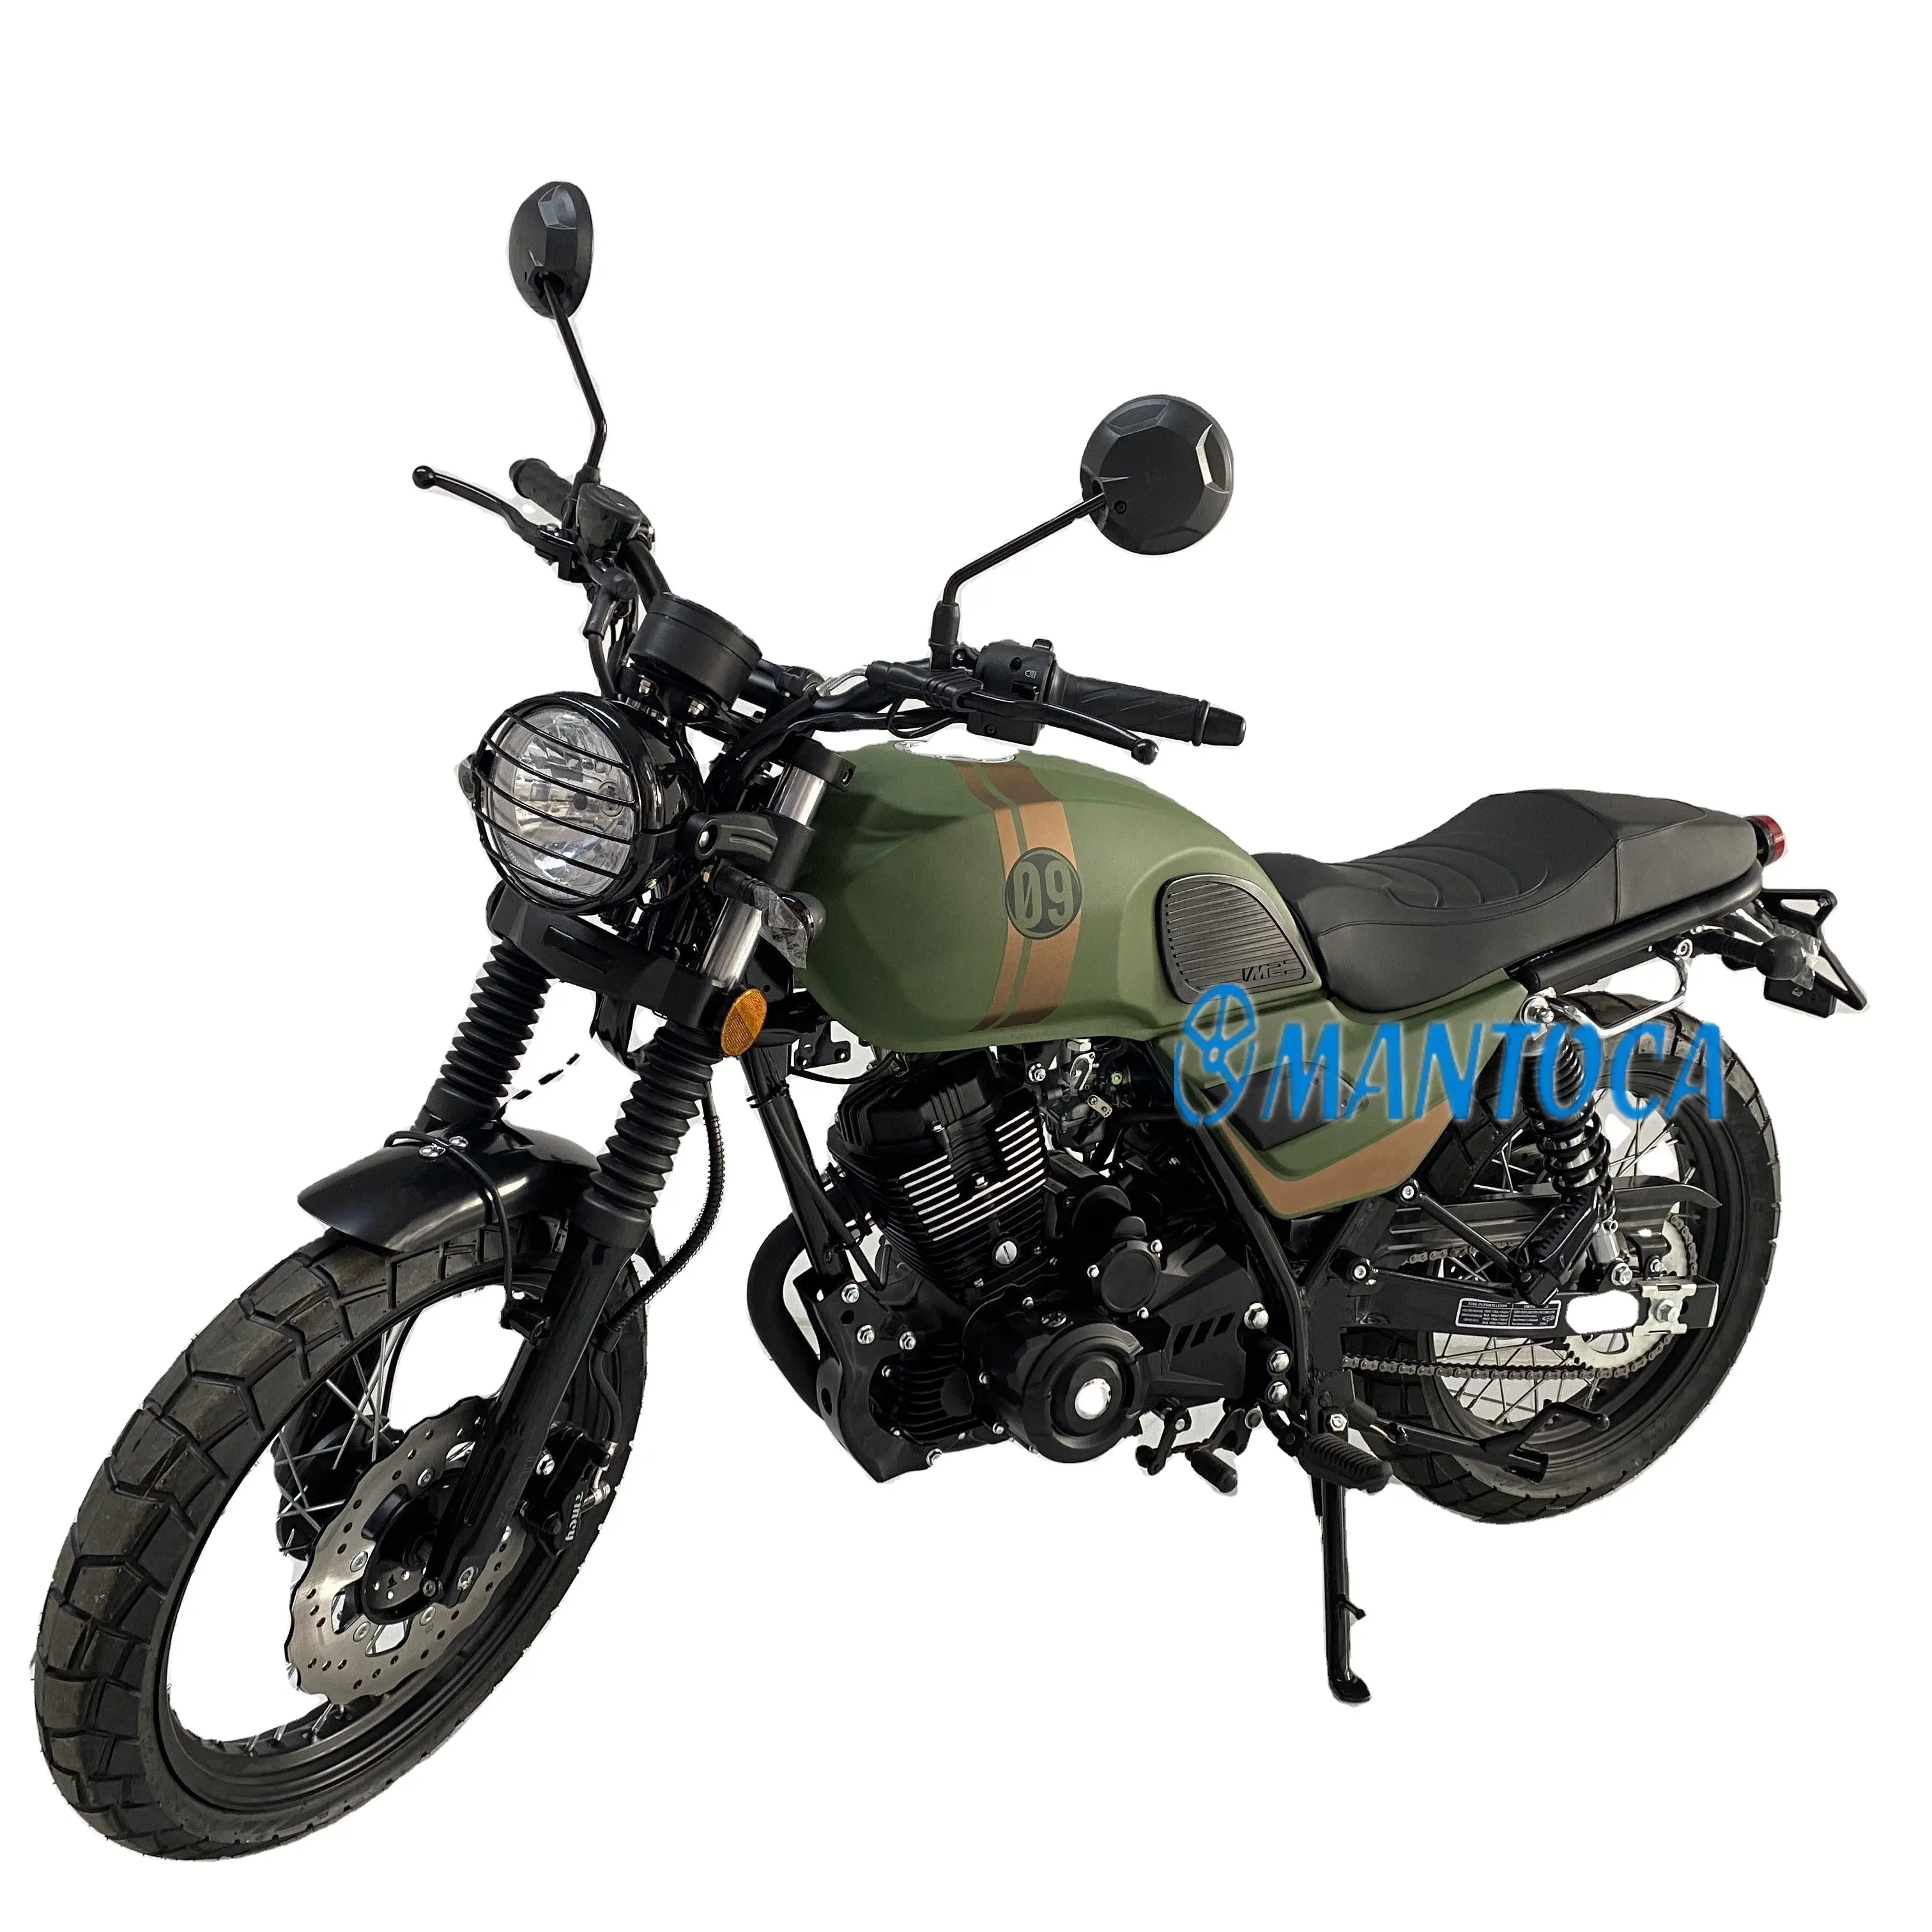 Off Road Motorcycle Sports Racing Motorcycles Street Motorcycles